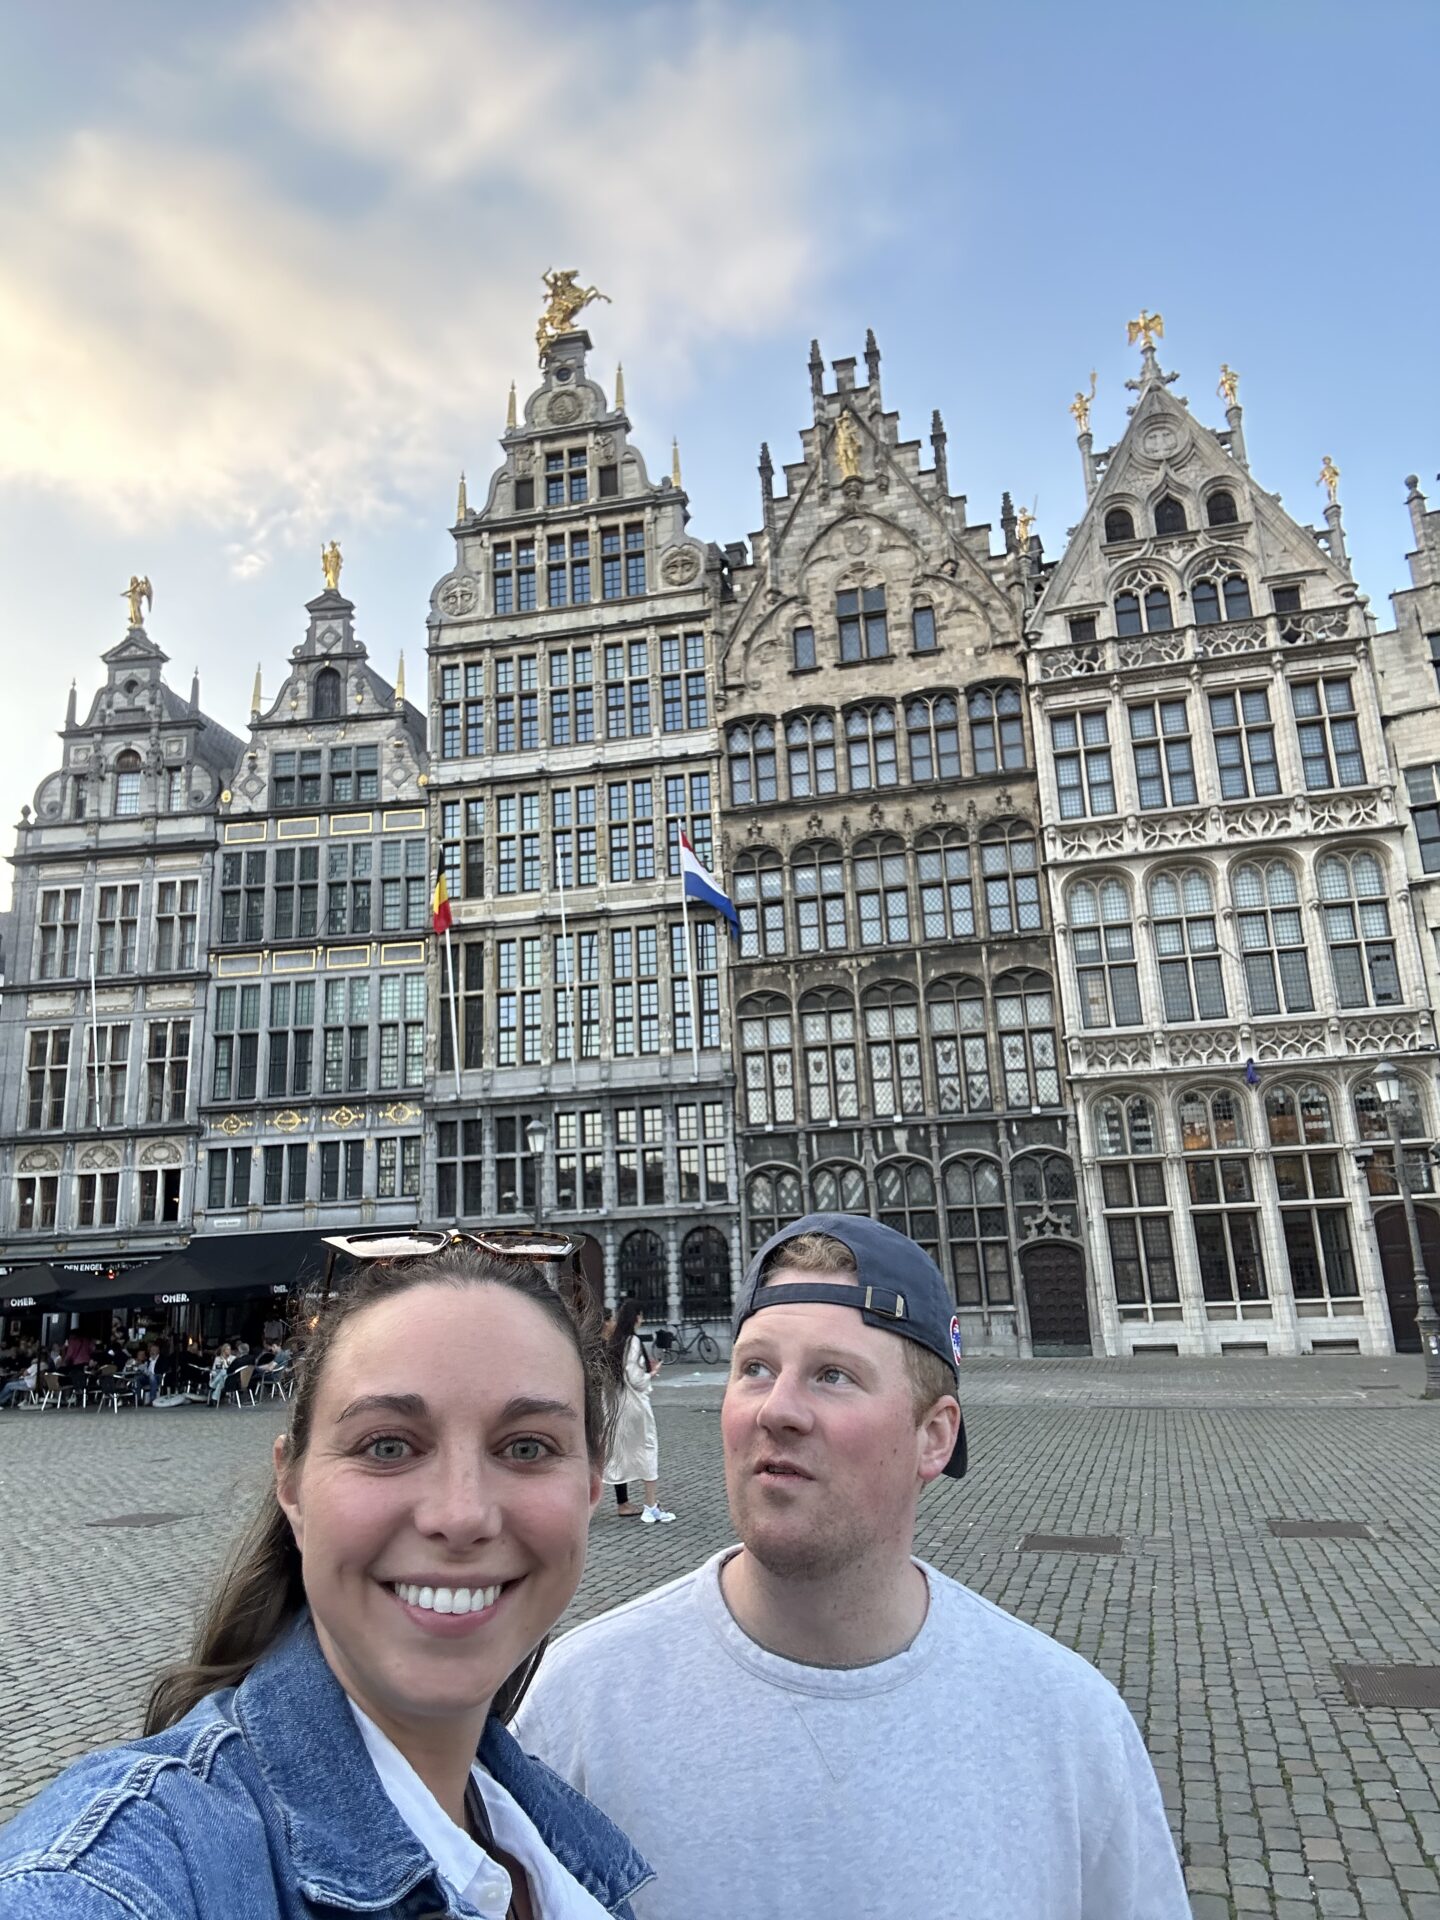 woman and man taking a selfie in Antwerp belgium city center with belgium buildings and architecture in background